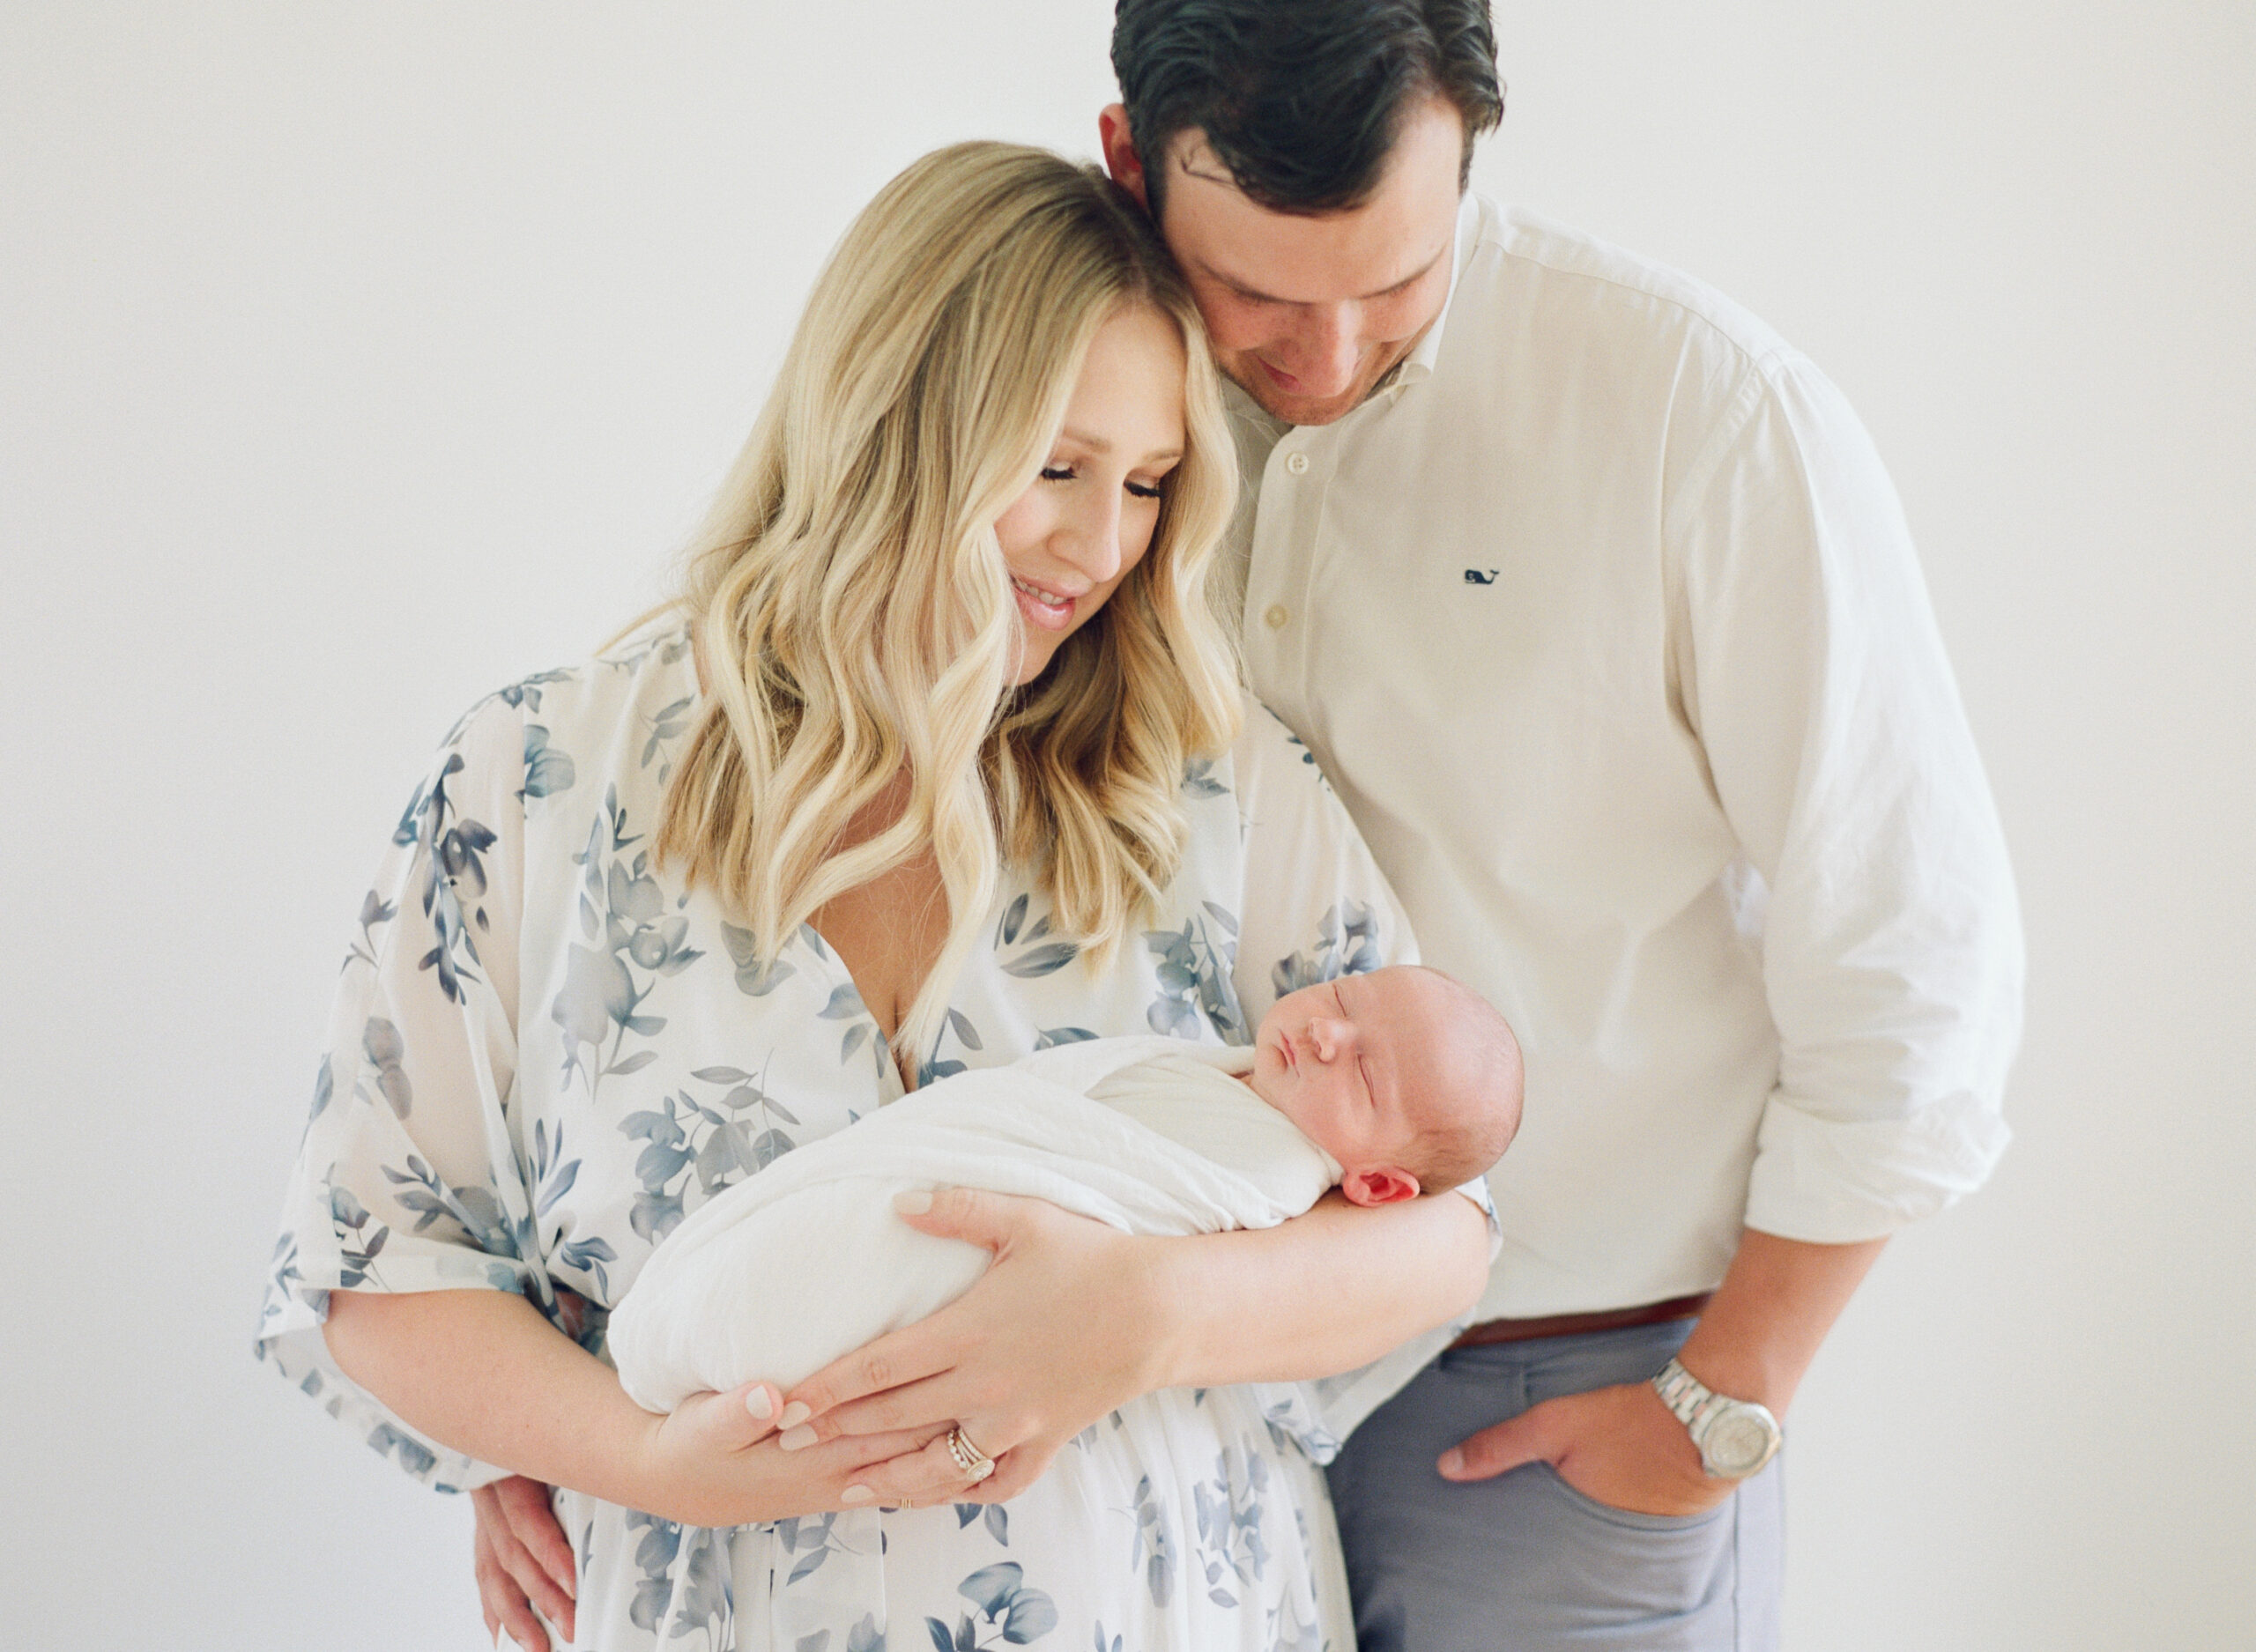 Mom and dad hold their newborn son while looking down lovingly over him during their Raleigh newborn session. Photographed by Raleigh Newborn Photographer A.J. Dunlap Photography